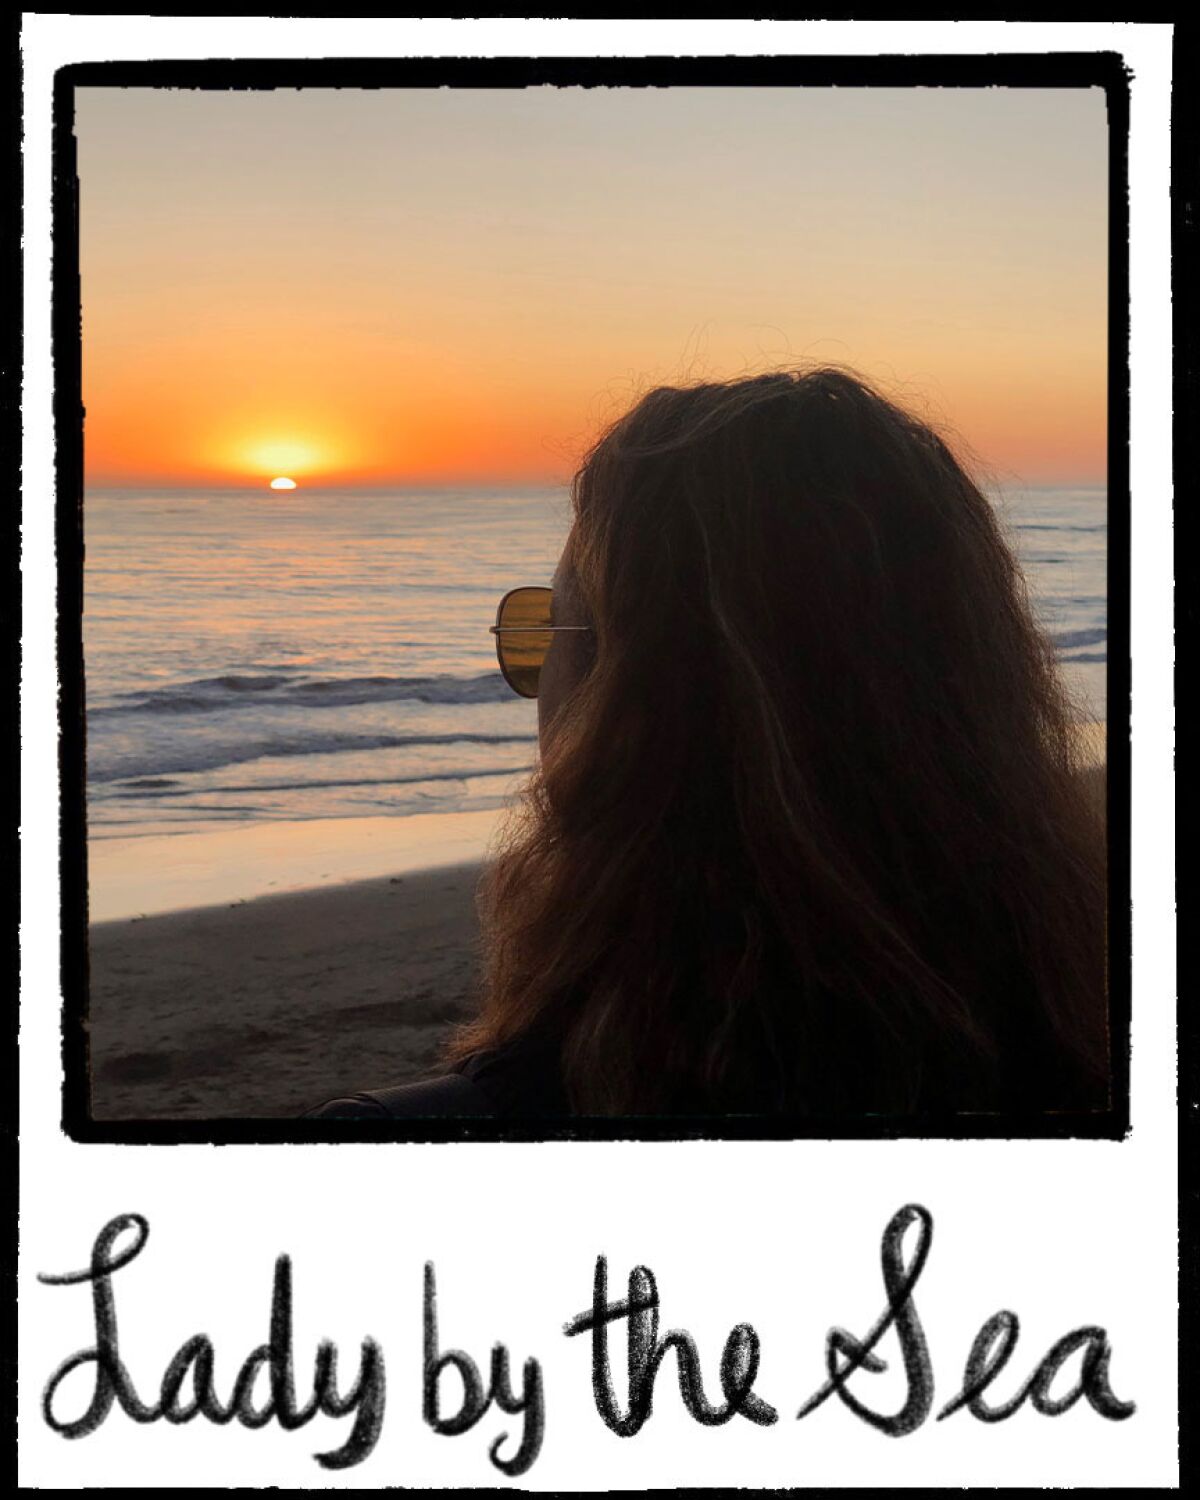 Illustrated polaroid frame with a photo of a woman looking at a beach sunset. 'Lady by the Sea' is written at bottom of frame